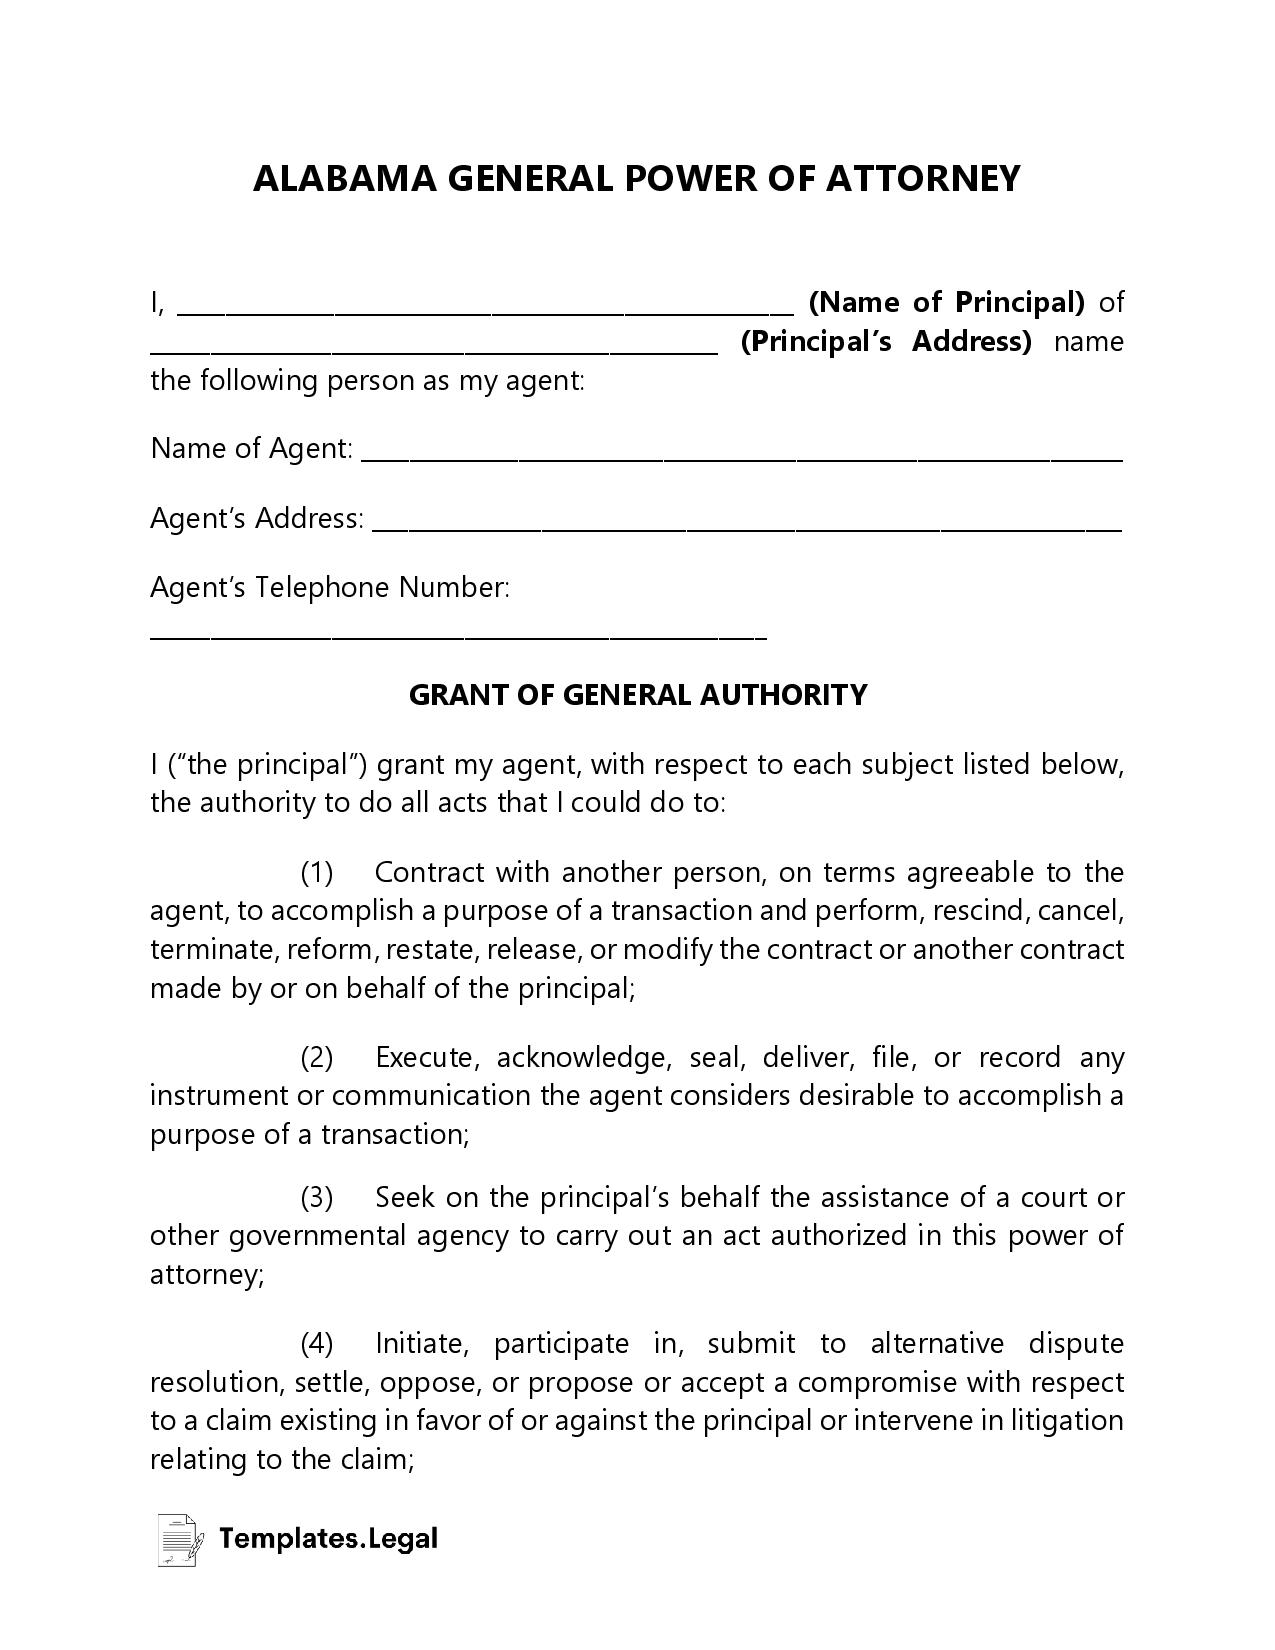 Alabama General Power of Attorney - Templates.Legal